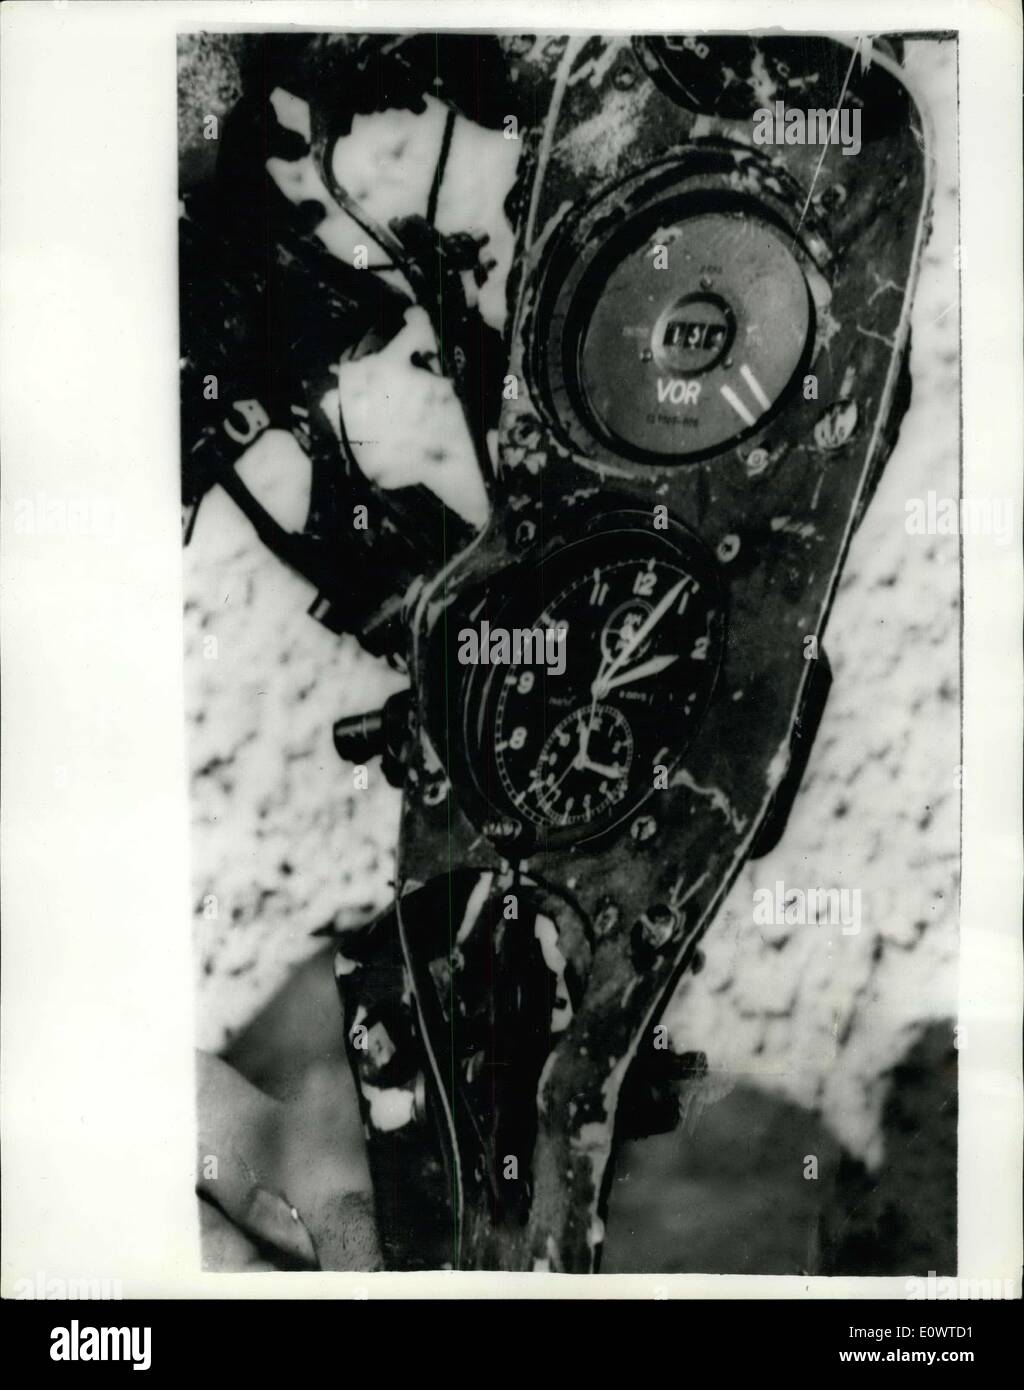 Mar. 03, 1964 - Time Riddle Of The Crashed Airlines: A clock on a battered instrument instrument panel may give a clue to why the Bristol Britannia airliner crashed into the Glungezer Mountain near Innsbruck, killing all 83 people on board. The hands of the clock, which was found amongst the wreckage yesterday, stand at four minutes past two, which was nine minutes before Innsbruck received the last message from the plane, reporting it's height to be 10,000 ft., which suggests to experts that the plane suffered from trouble in the electrical systems a little time before the crash occured Stock Photo